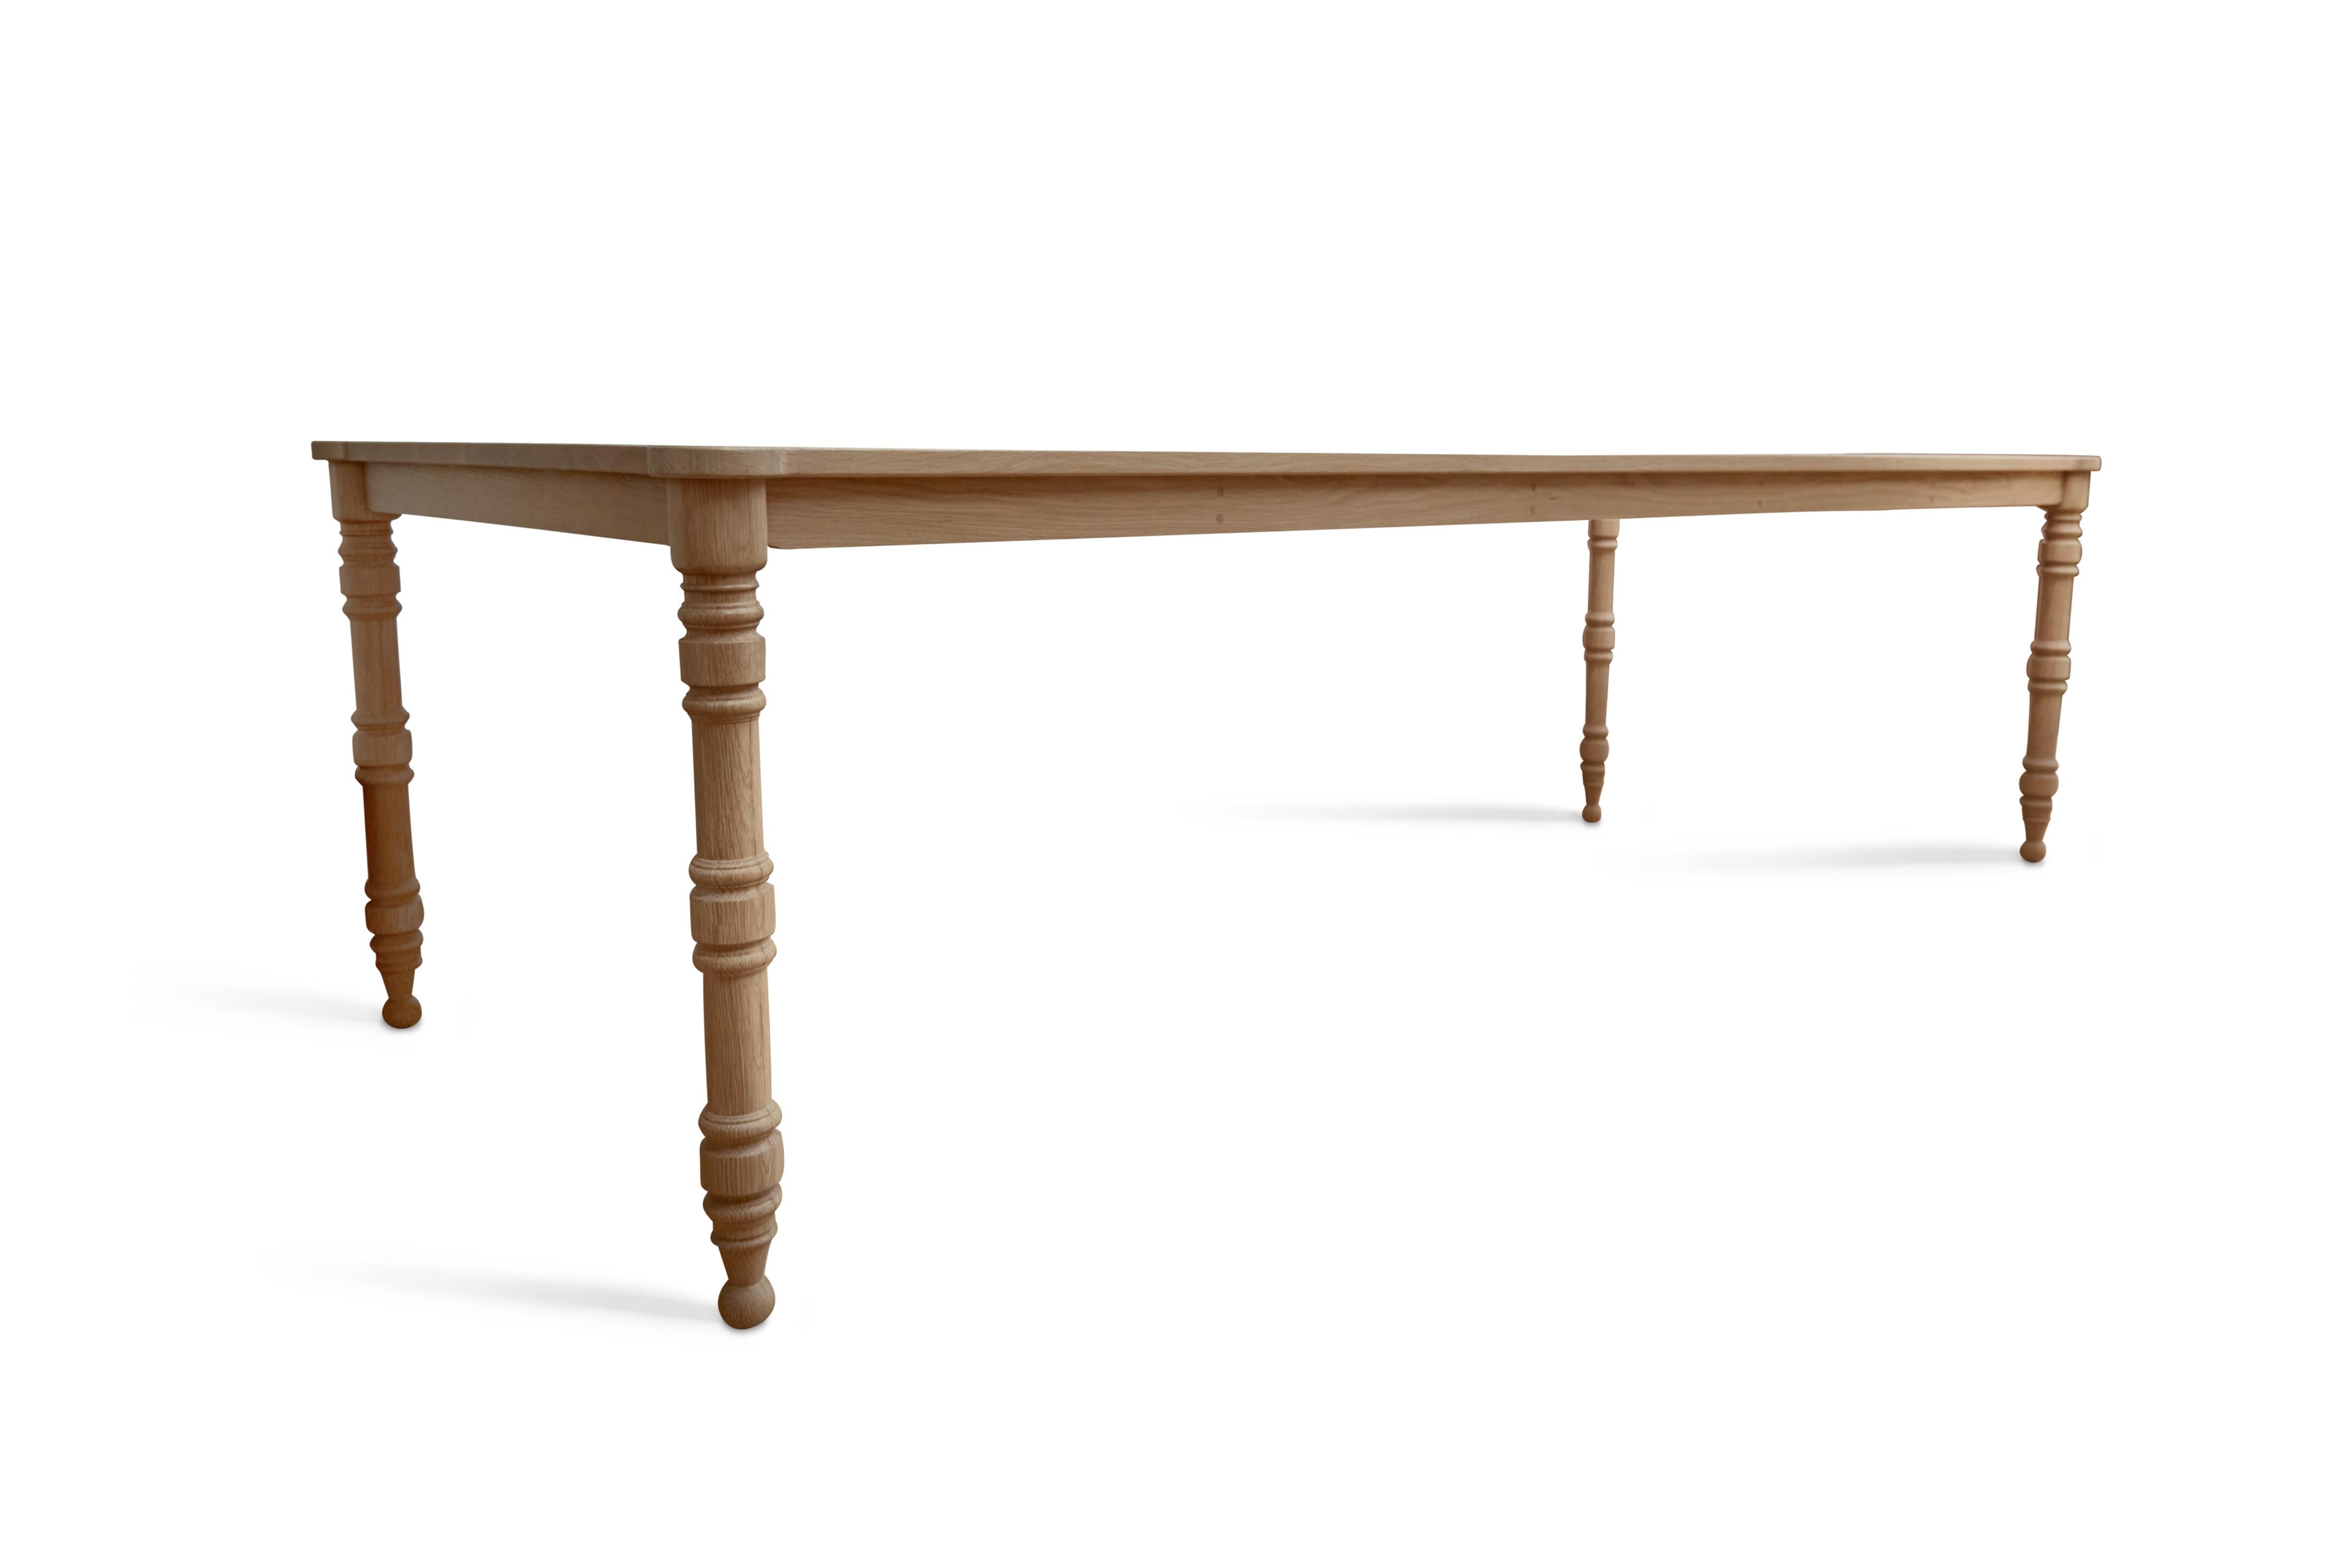 Introducing our artisan-made Sunset Dining Table. A new piece with a timeworn feel--the solid wood top is paired with lathe-turned legs, which taper down to ball feet. The design melds vintage-inspired details with a contemporary scale. 

Inspired